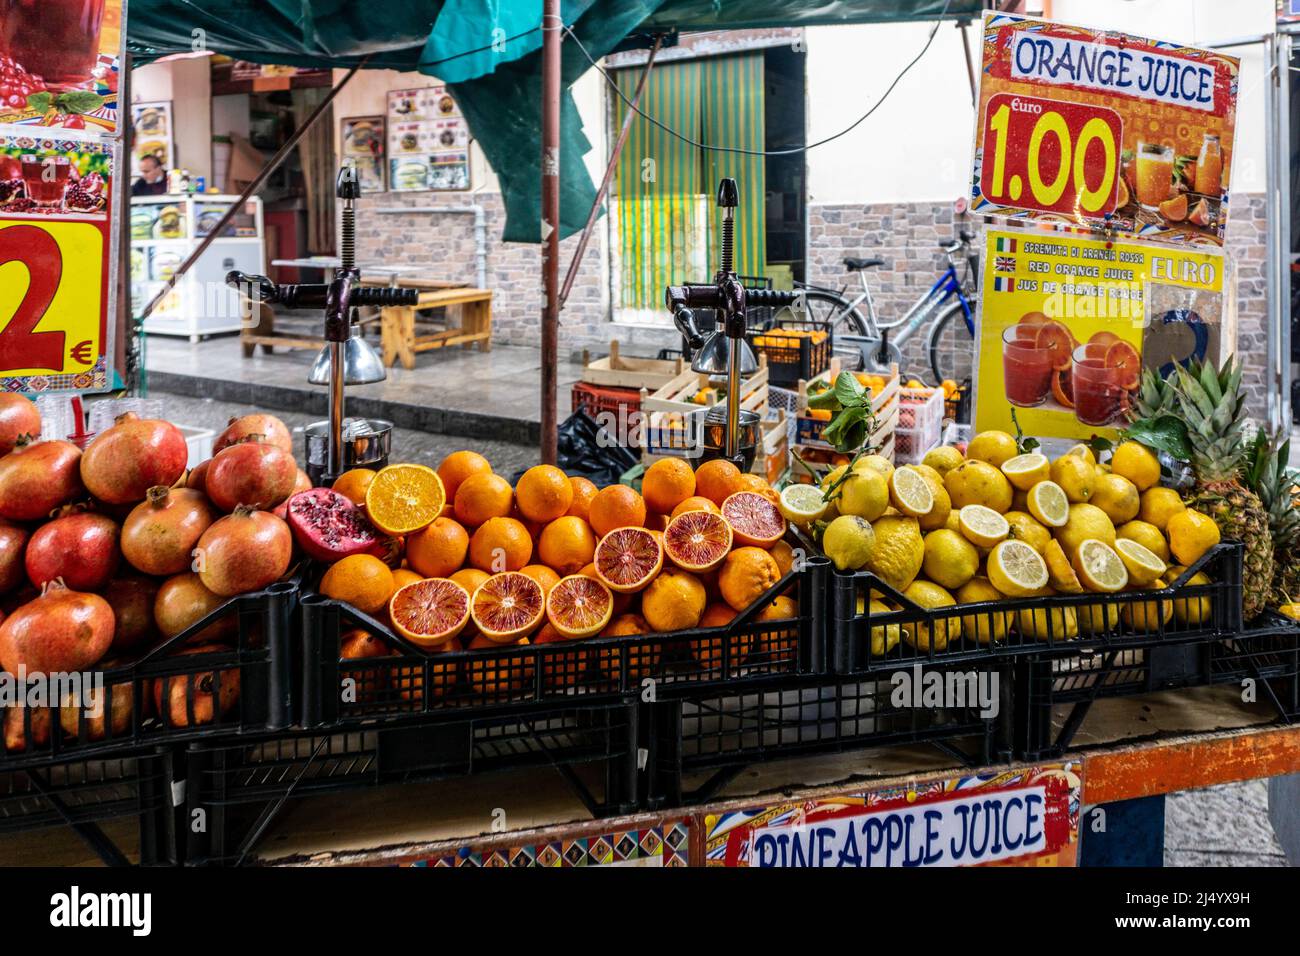 A juice stall stall in the open air market in Ballaró, Palermo, Sicily, Italy selling a variety of freshly made fruit juice. Stock Photo